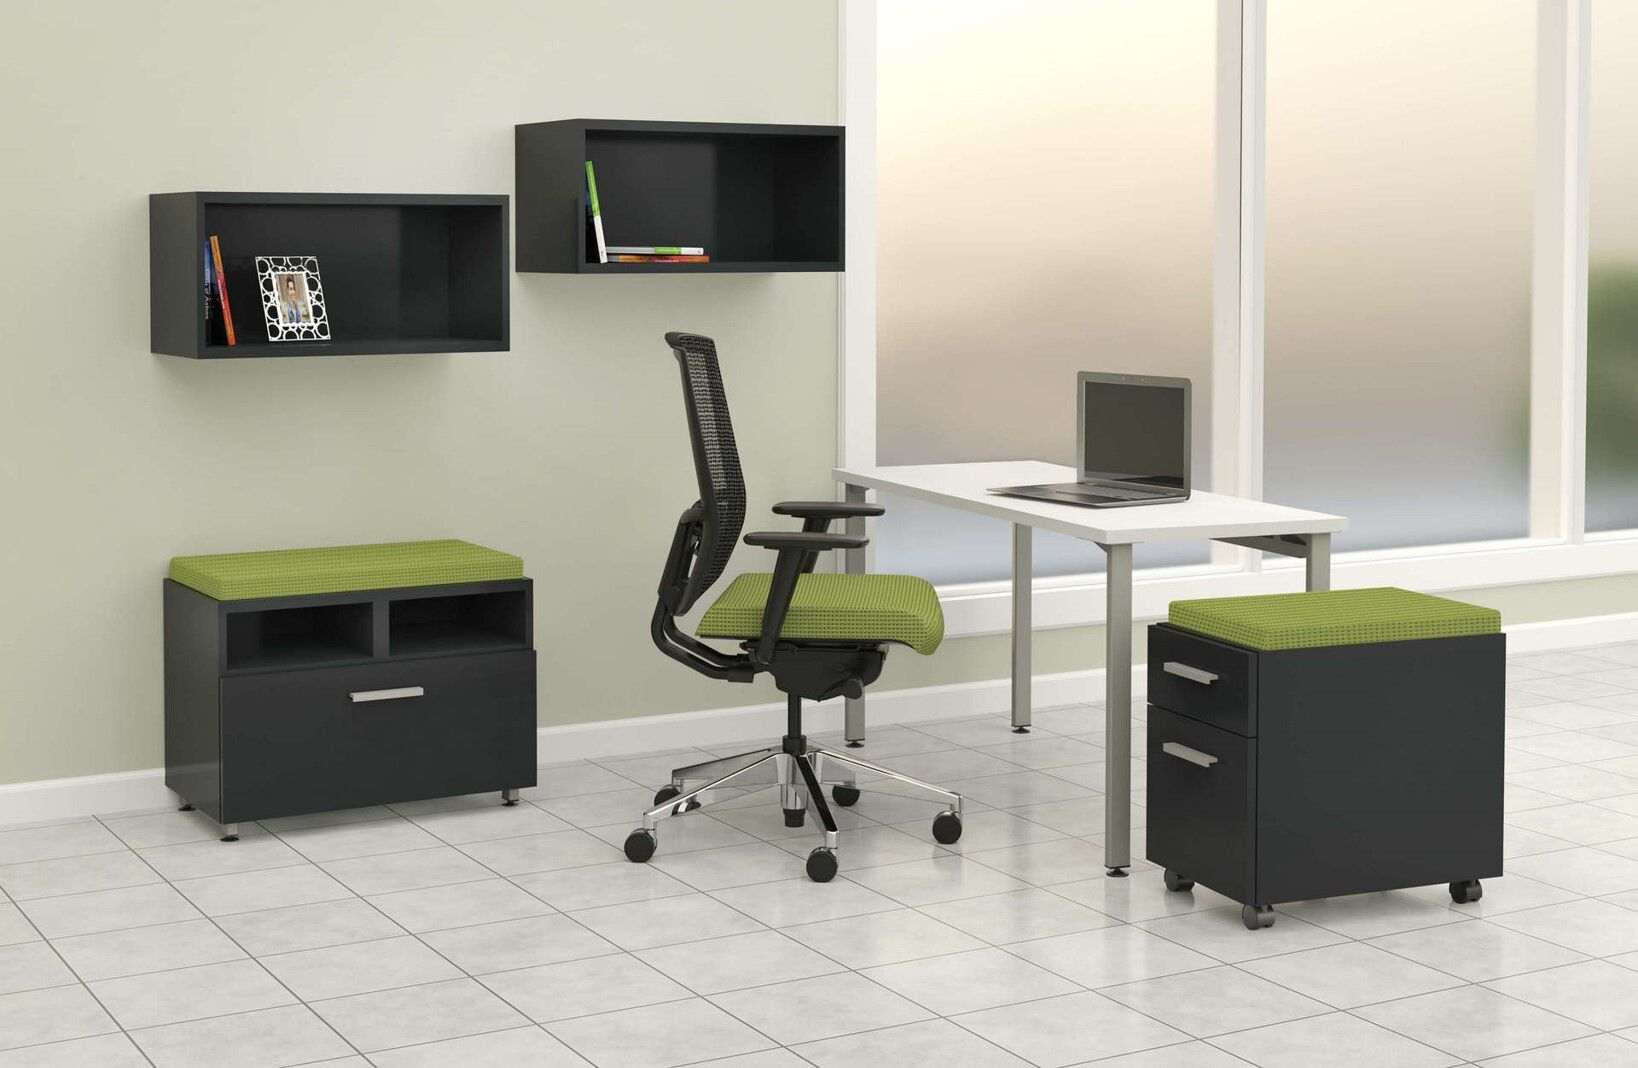 L shaped desks for home office environmental side_preview